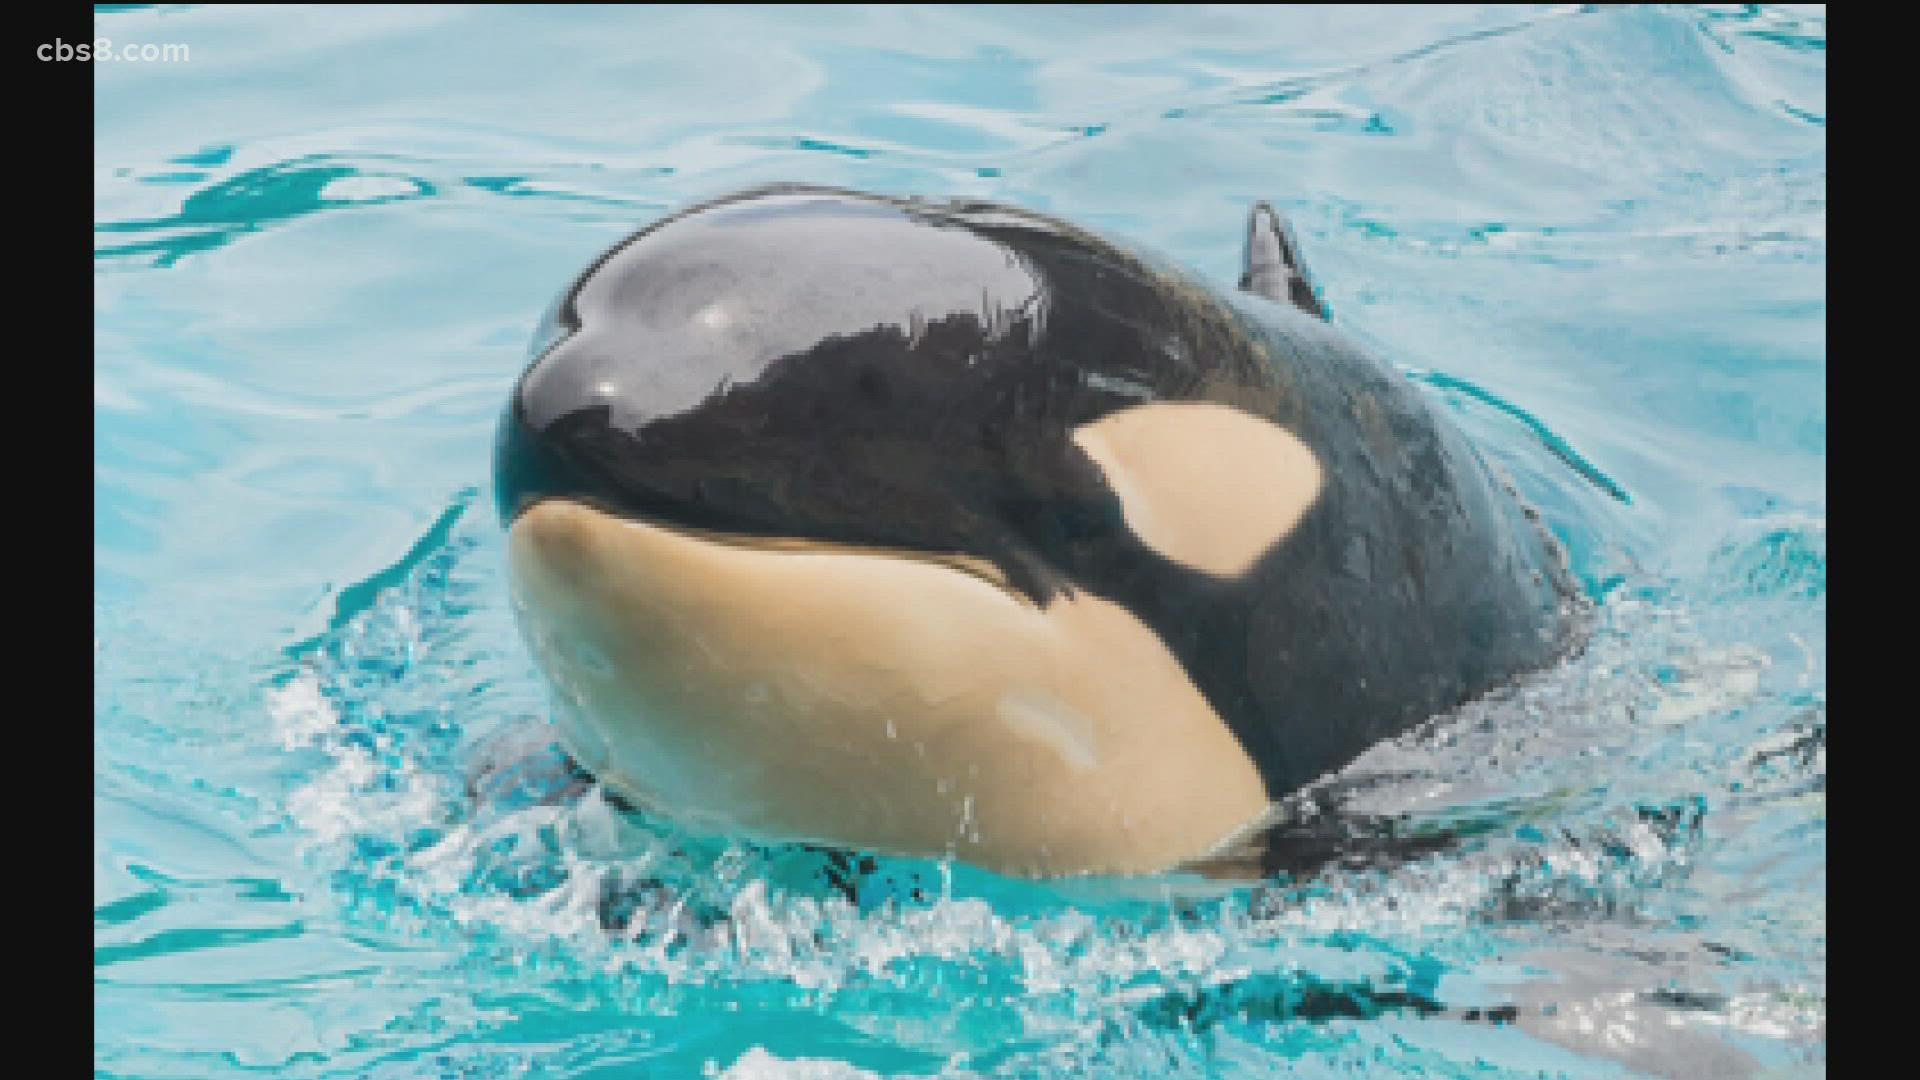 Amaya began showing signs of illness on Wednesday, and animal care specialists and veterinarians began treating her immediately, SeaWorld said in a statement.